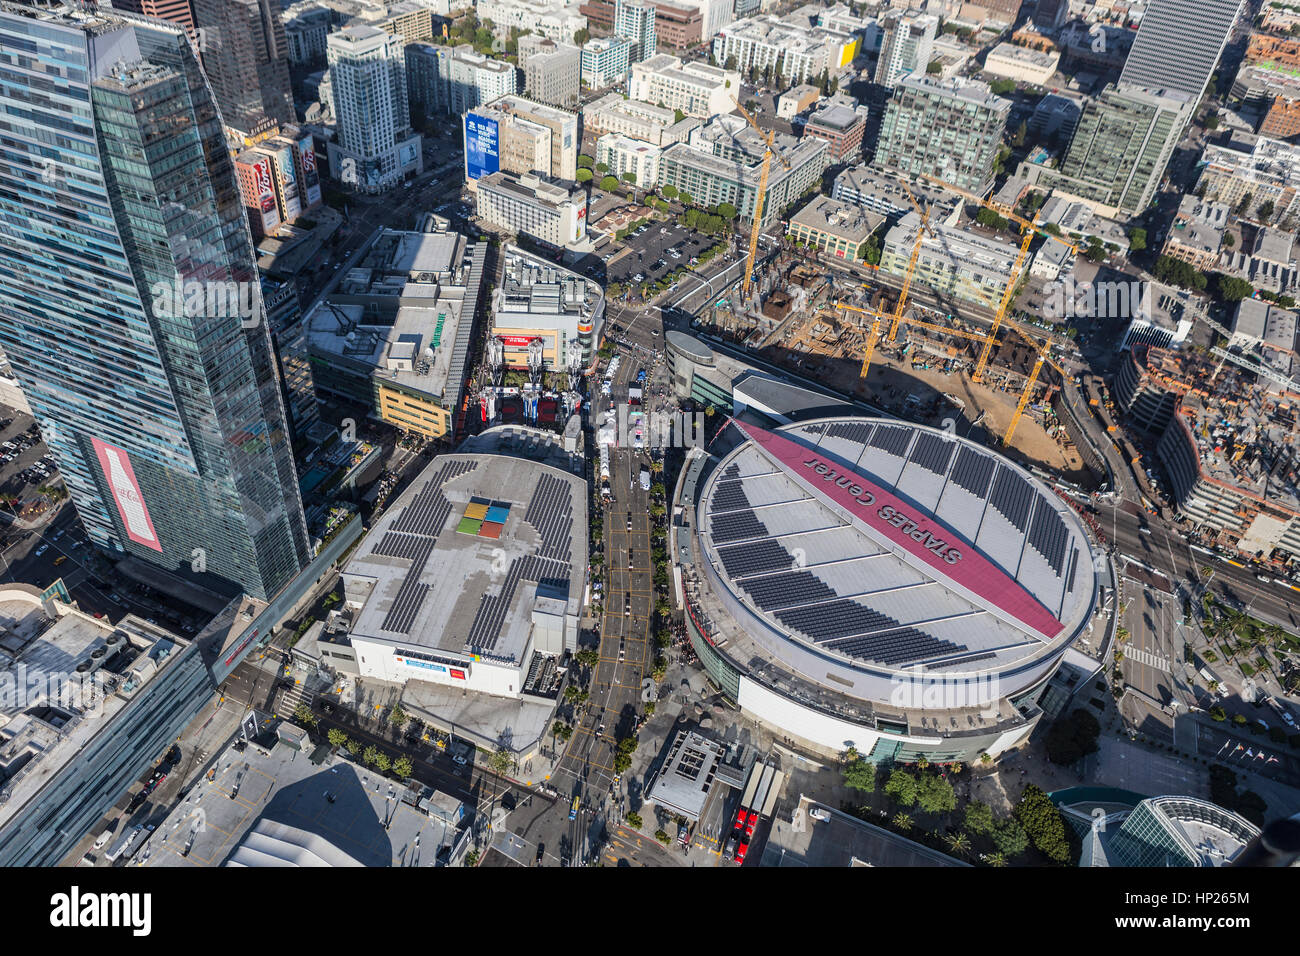 Los Angeles, California, USA - August 6, 2016:  Aerial view of Staples Center, LA Live and nearby construction. Stock Photo